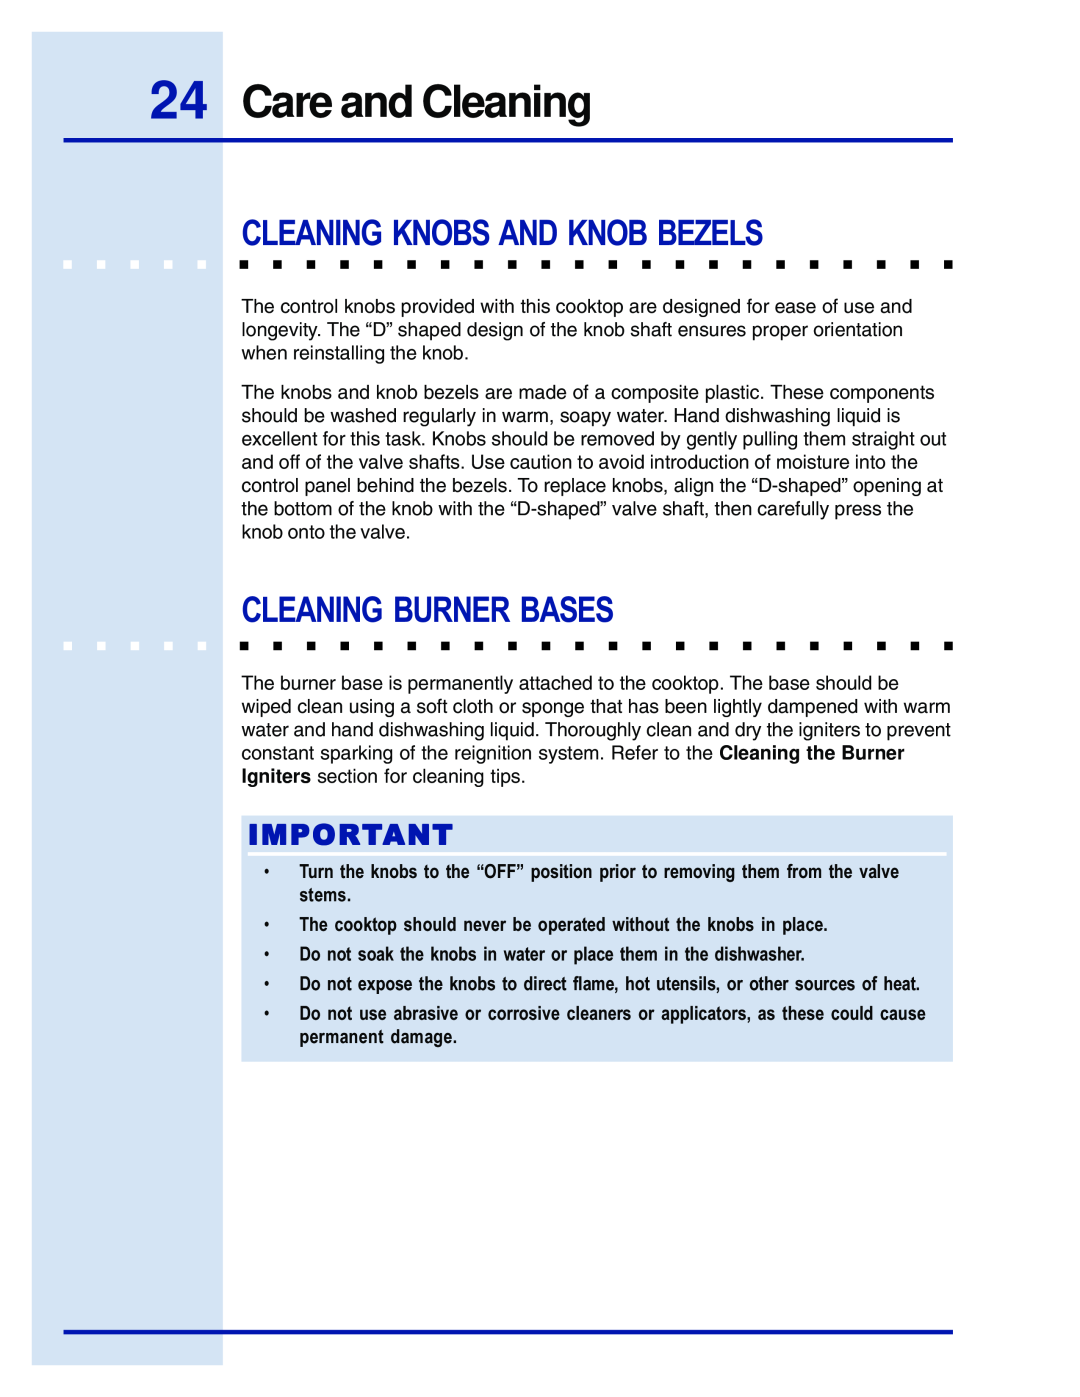 Electrolux E48GC76EPS manual Care and Cleaning, Cleaning Knobs And Knob Bezels, Cleaning Burner Bases 